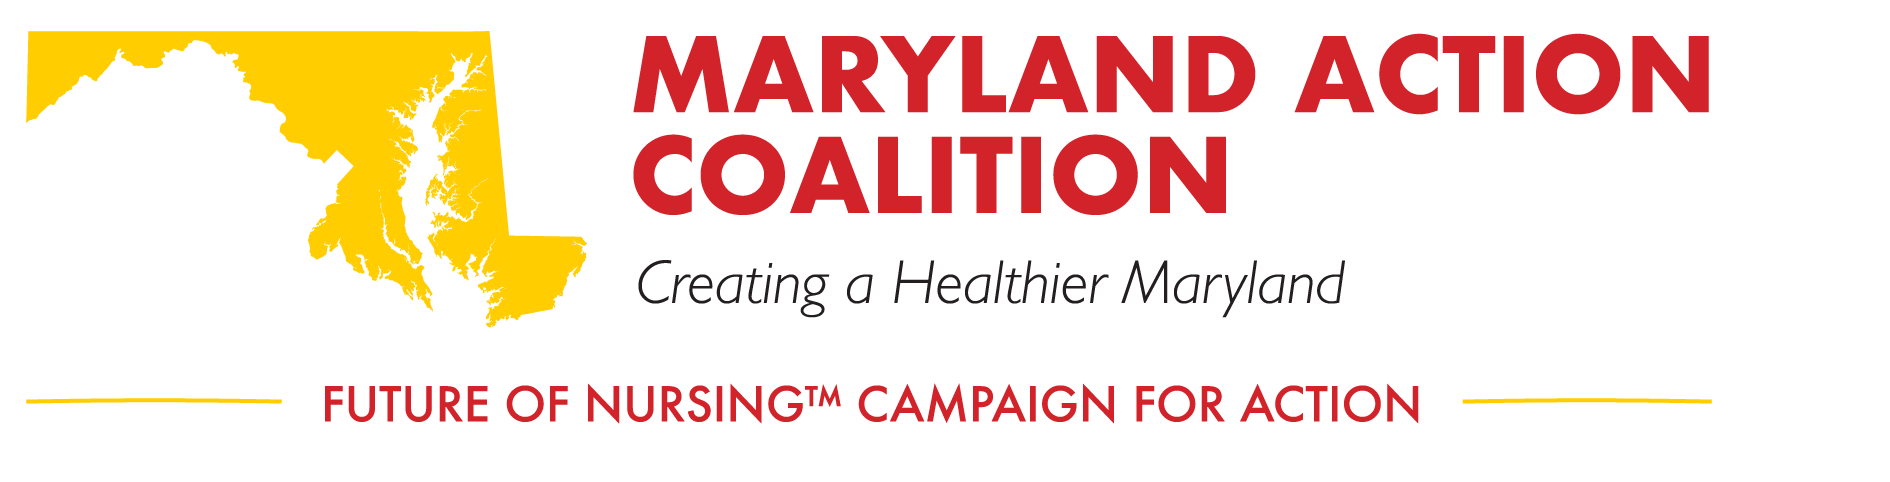 Maryland Action Coalition - Creating a Healthier Maryland - Future of Nursing Campaign for Action